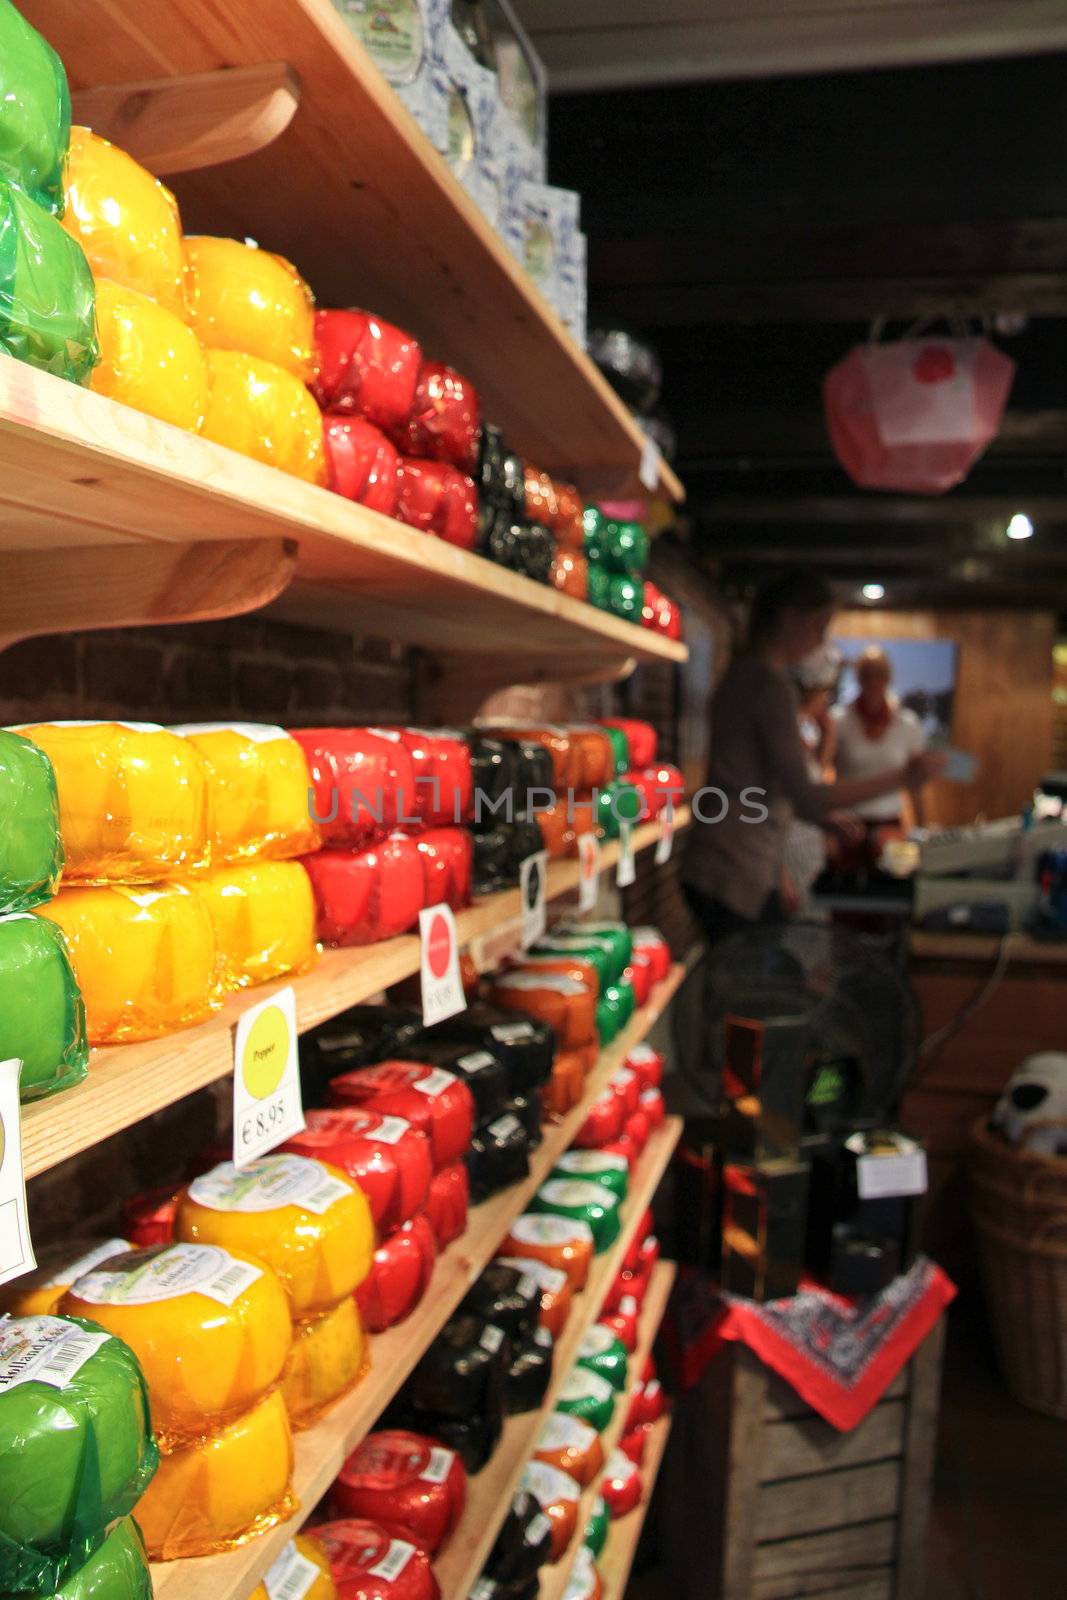 Shelves with different types of typical Dutch cheese.